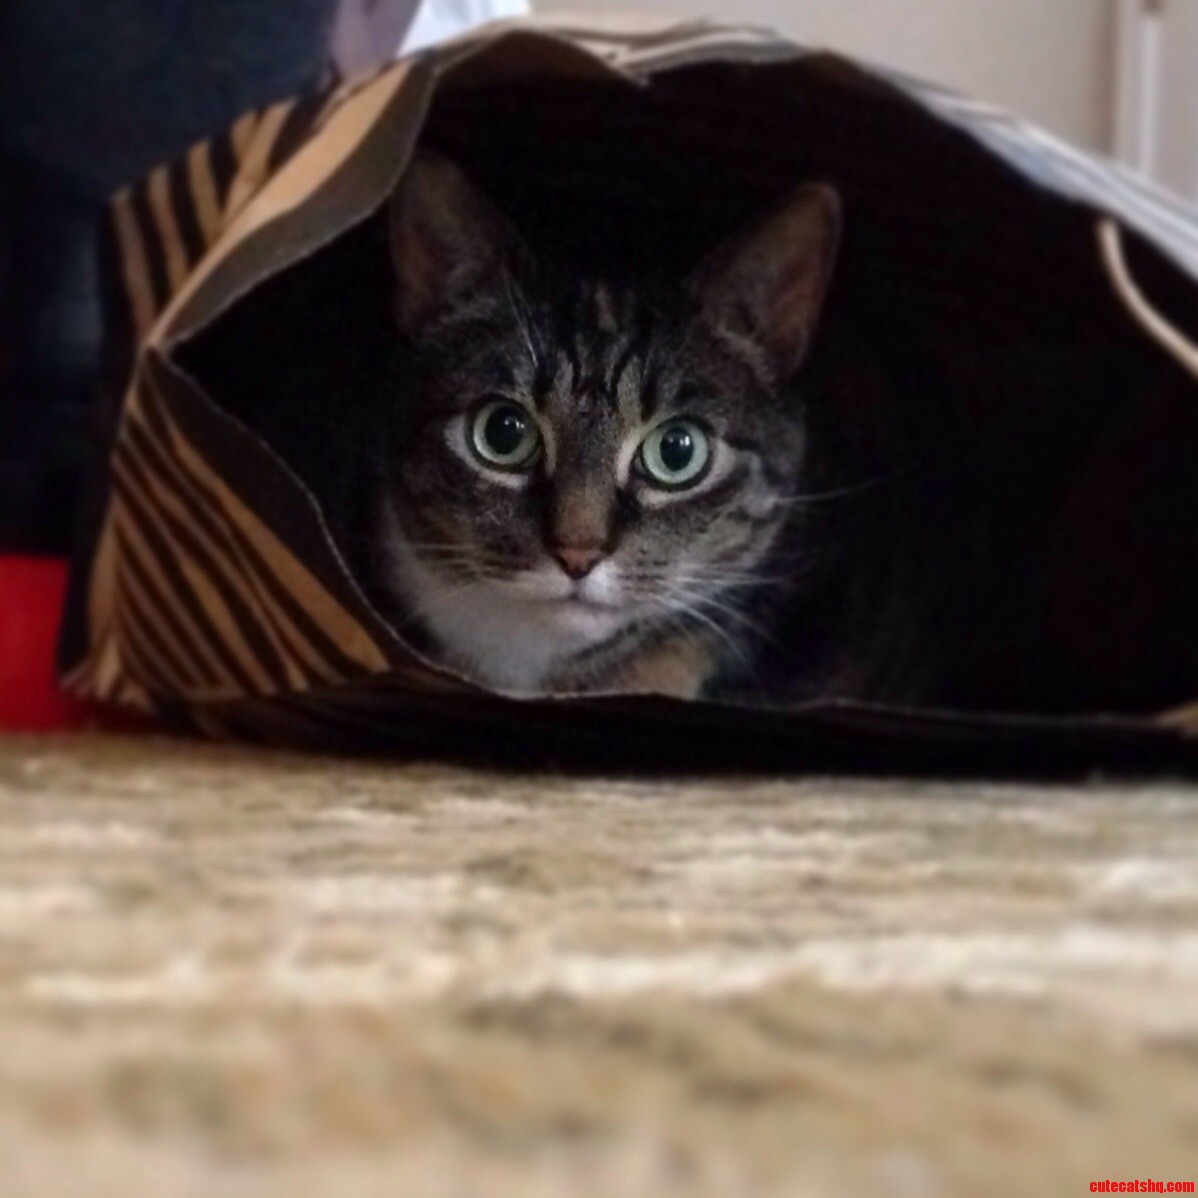 One Of Mimmys Favorite Past Times… Hiding In A Shopping Bag.